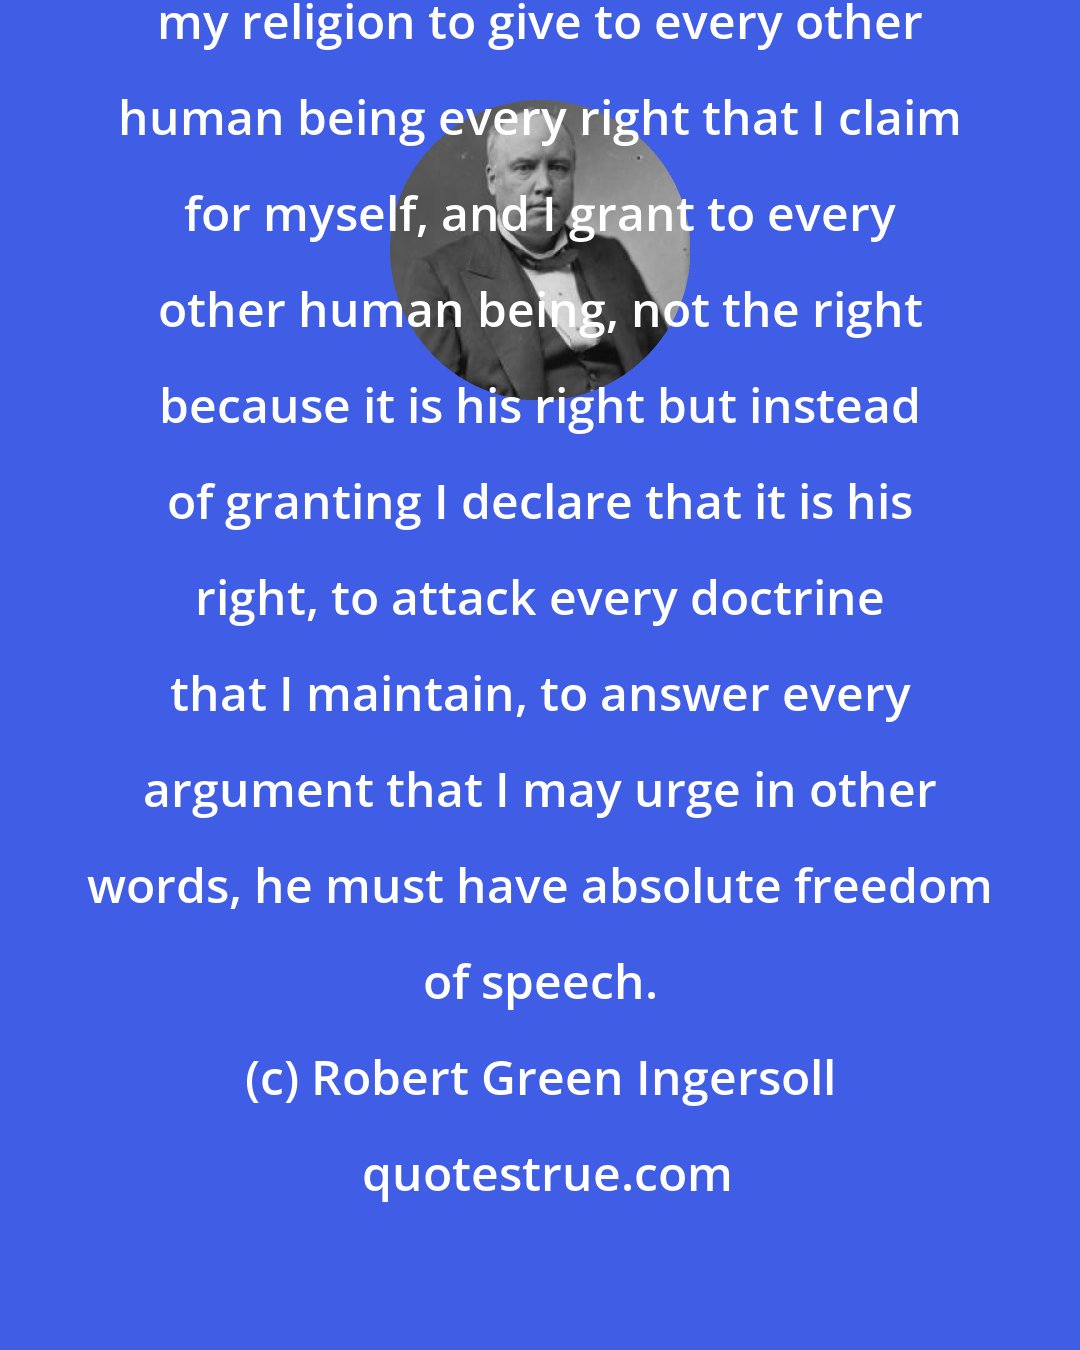 Robert Green Ingersoll: I am a believer in liberty . That is my religion to give to every other human being every right that I claim for myself, and I grant to every other human being, not the right because it is his right but instead of granting I declare that it is his right, to attack every doctrine that I maintain, to answer every argument that I may urge in other words, he must have absolute freedom of speech.